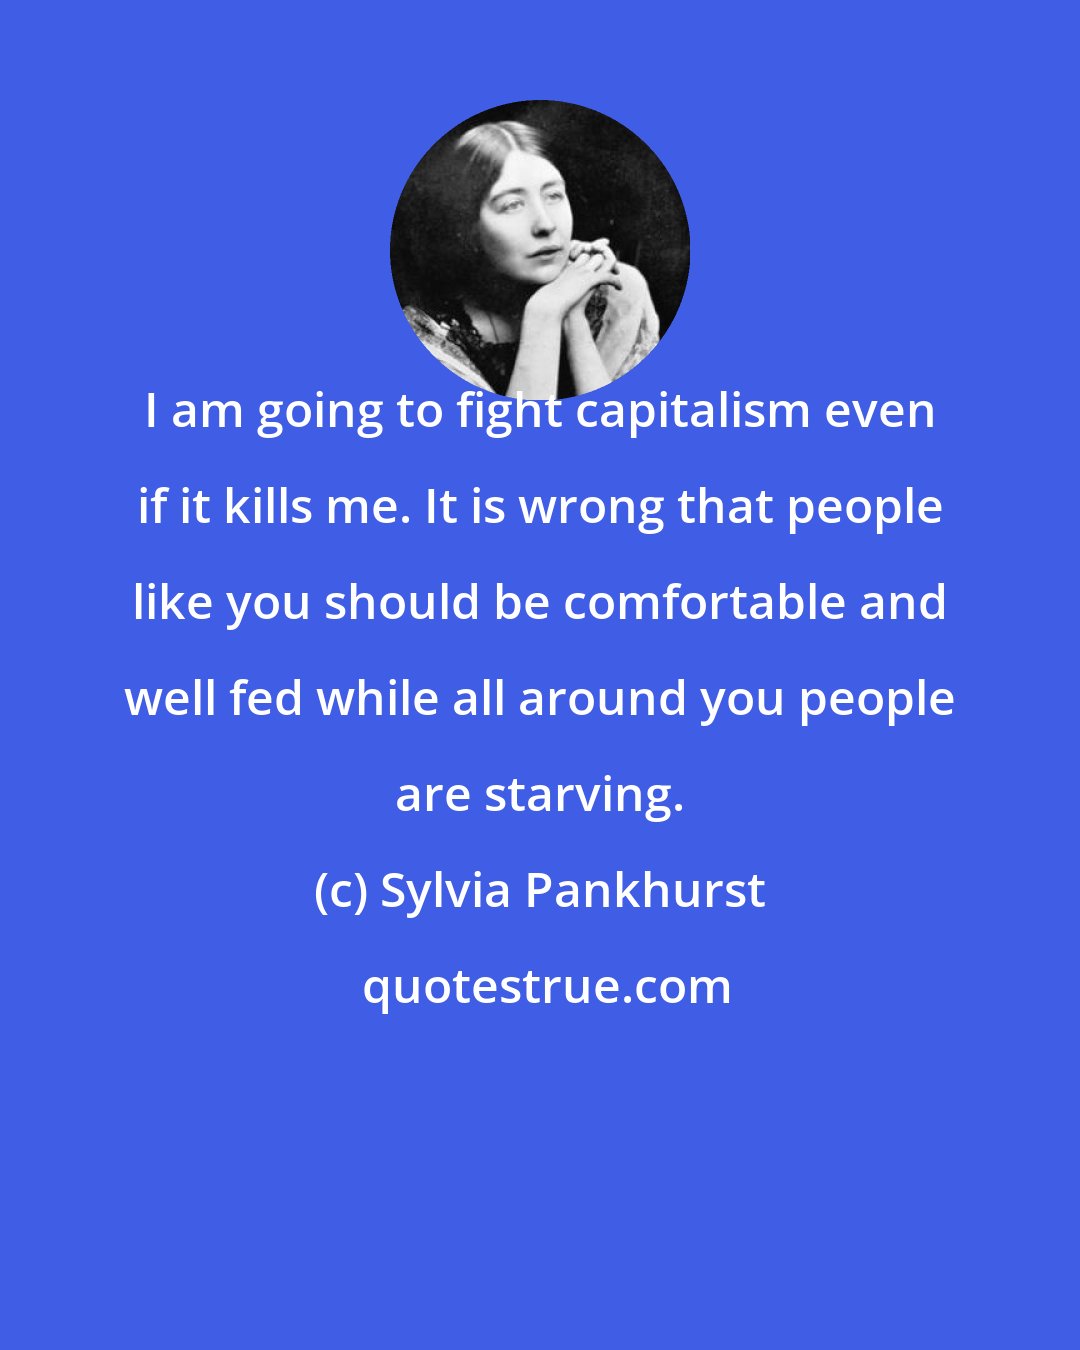 Sylvia Pankhurst: I am going to fight capitalism even if it kills me. It is wrong that people like you should be comfortable and well fed while all around you people are starving.